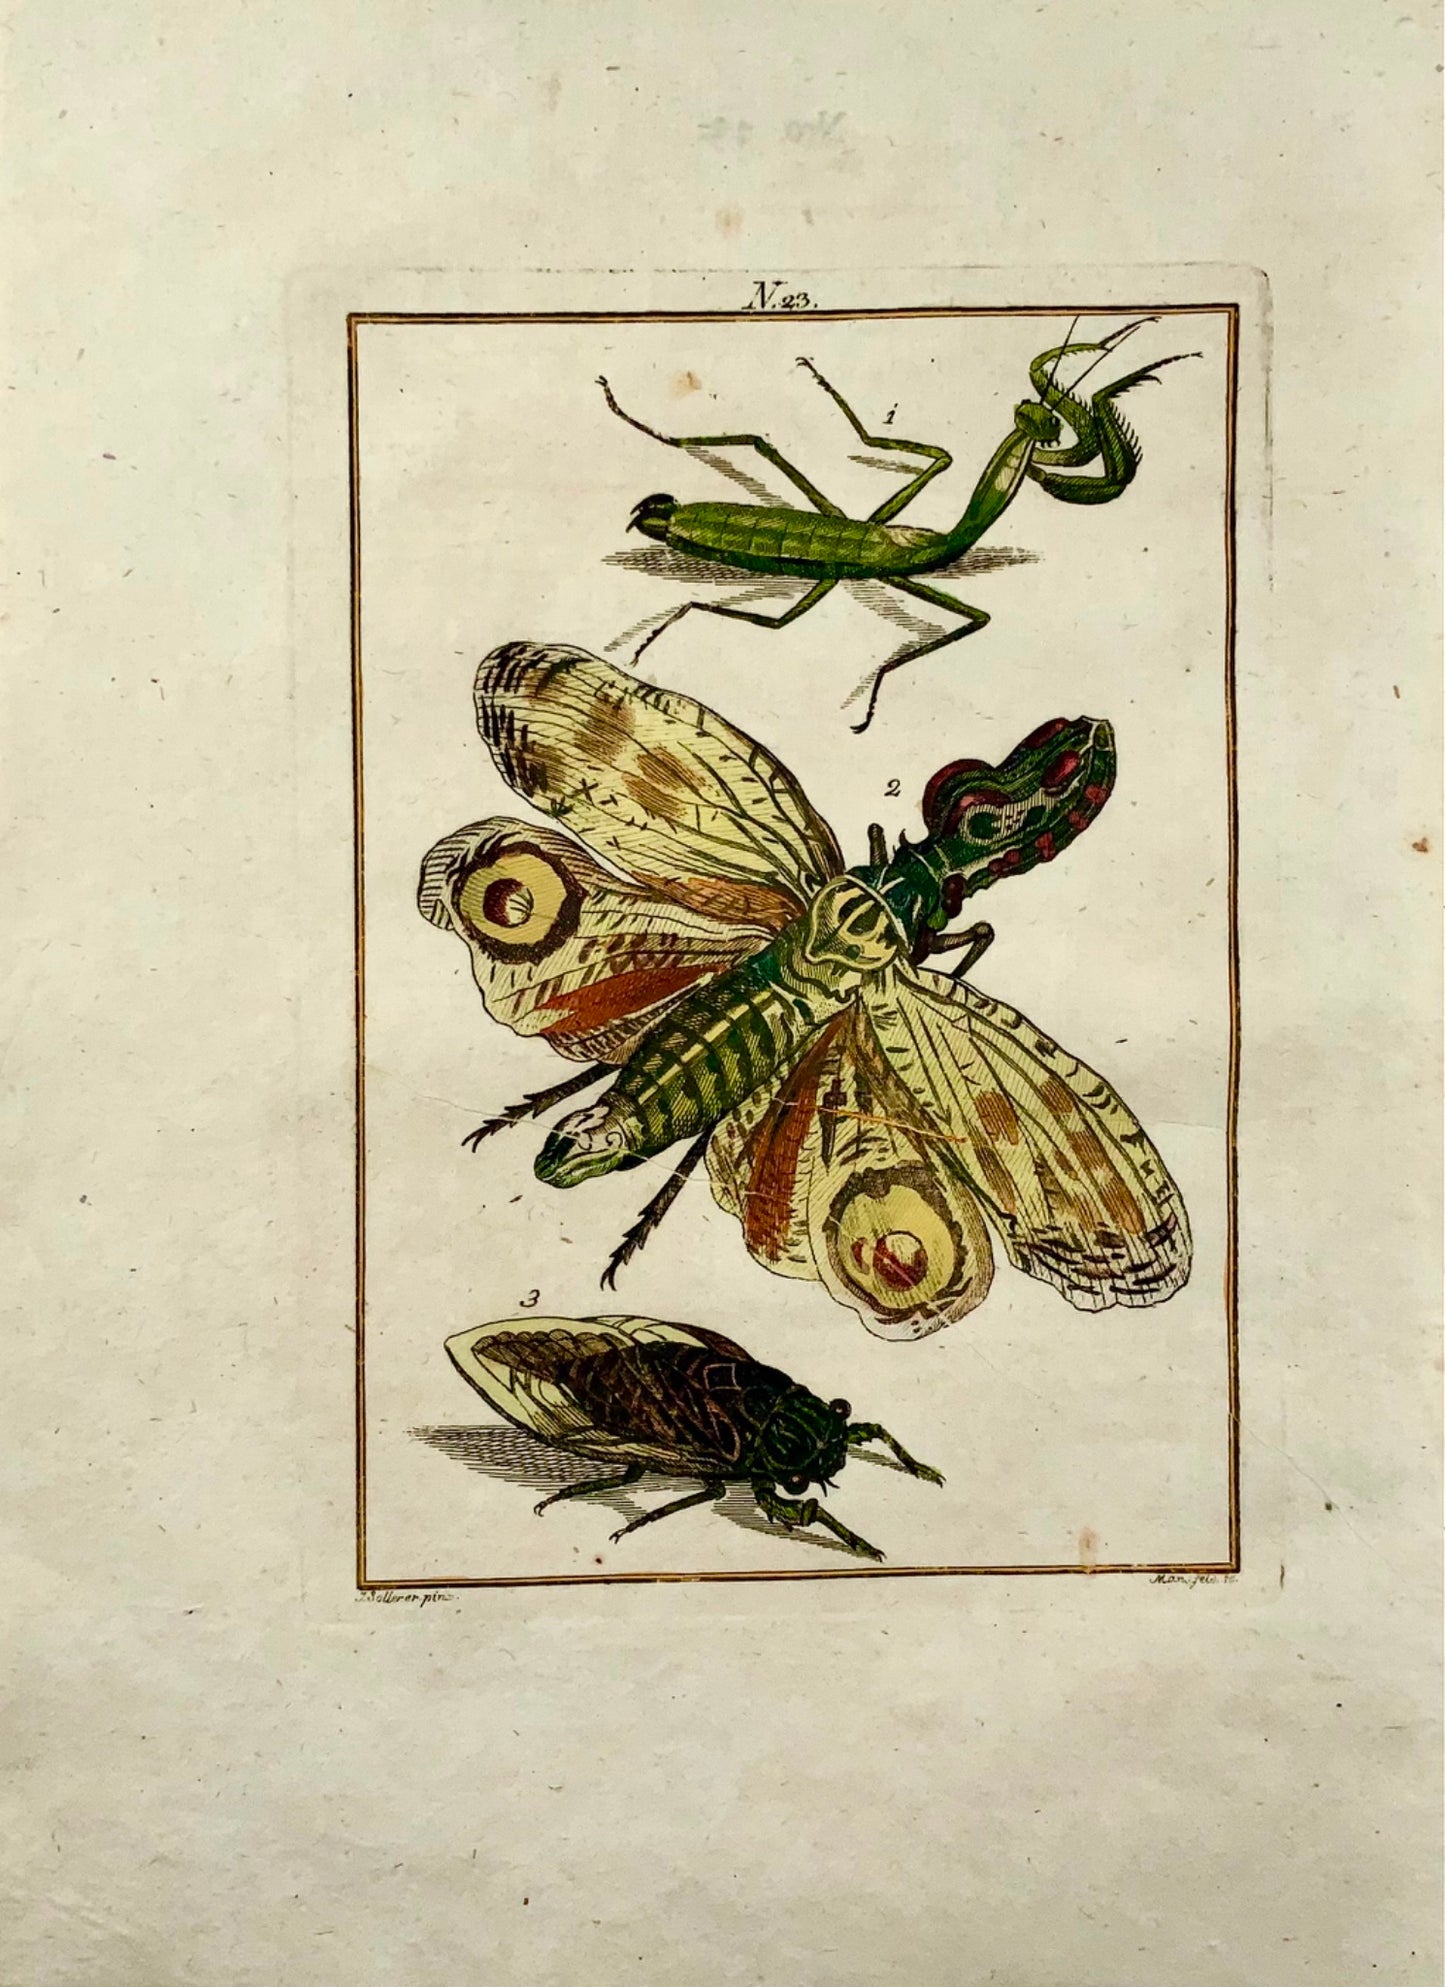 1790 Flying Mantis, Insects, Joh. Sollerer hand coloured engraving